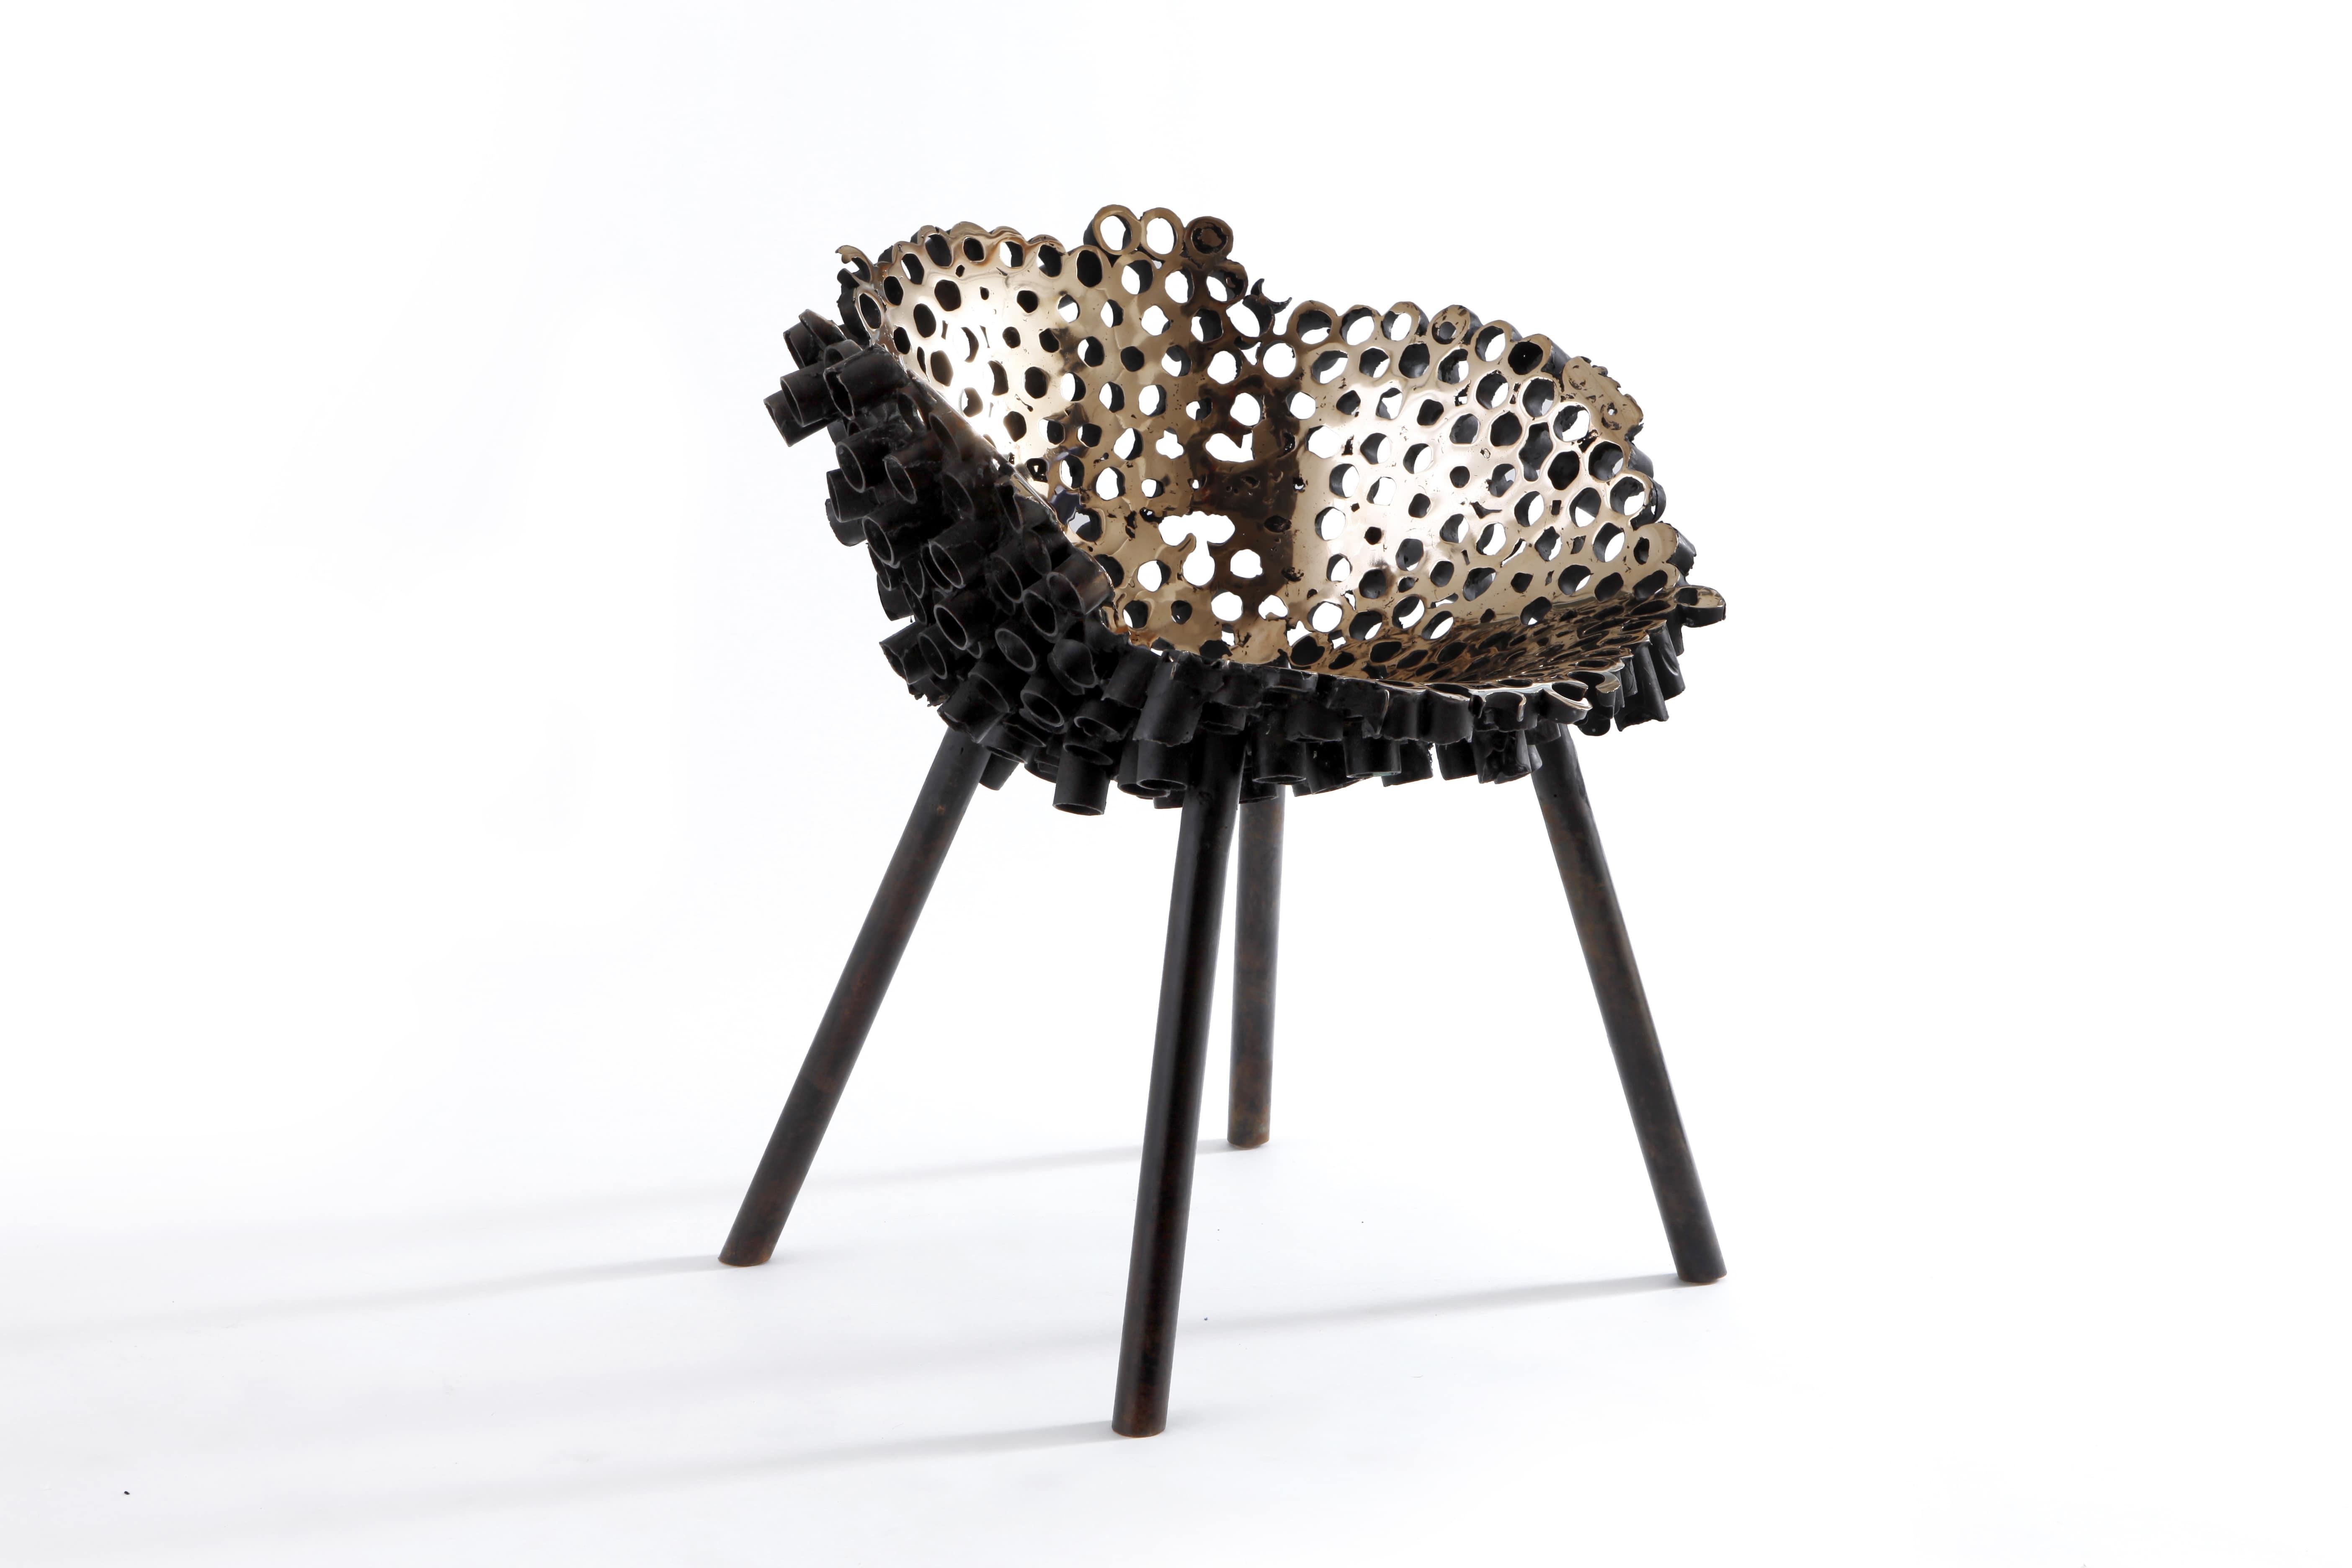 Spanish Meltdown Chair, Bronze #2 by Tom Price, Contemporary, Limited Edition For Sale